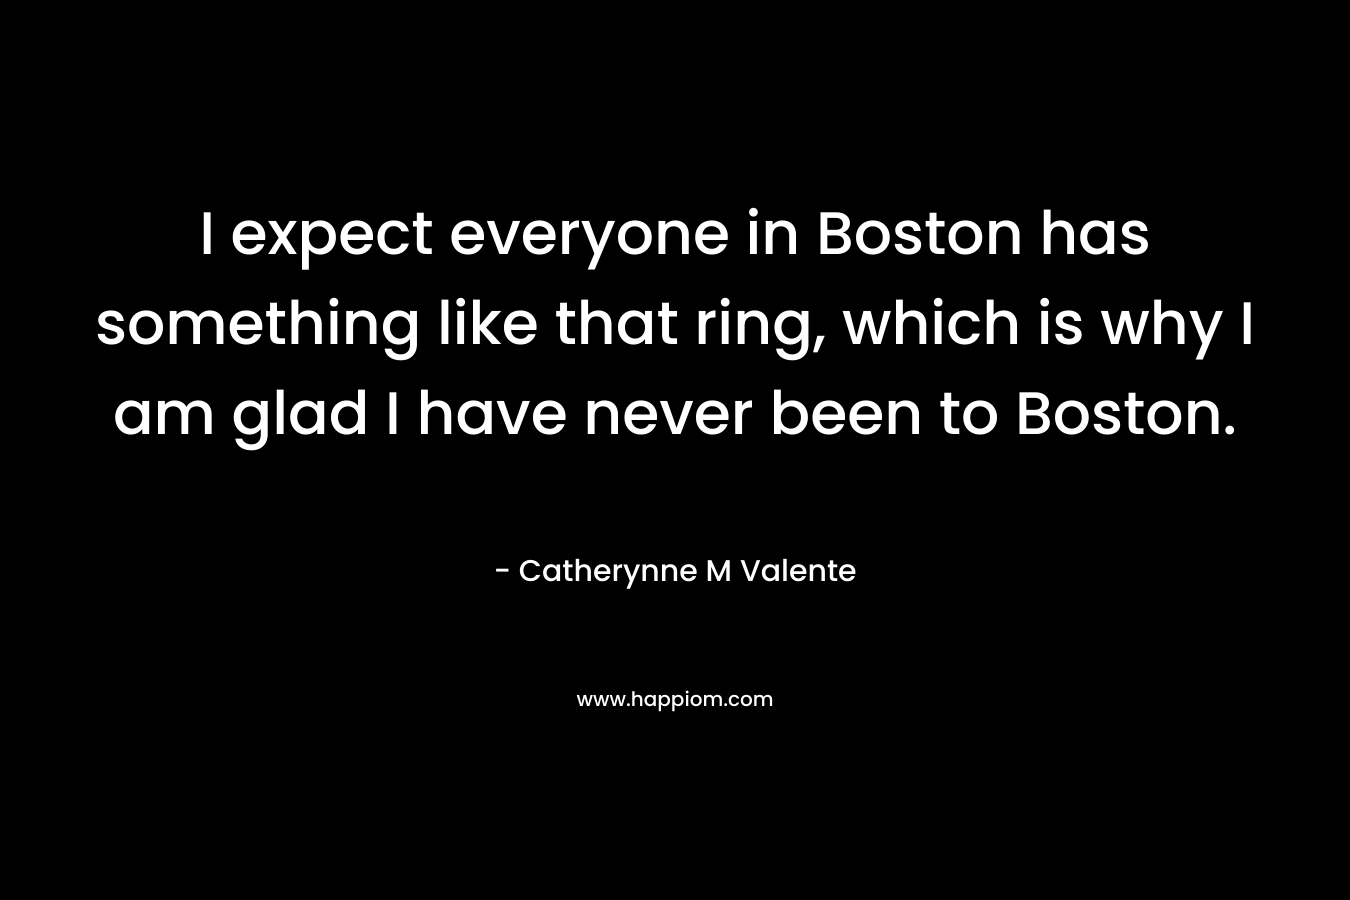 I expect everyone in Boston has something like that ring, which is why I am glad I have never been to Boston.